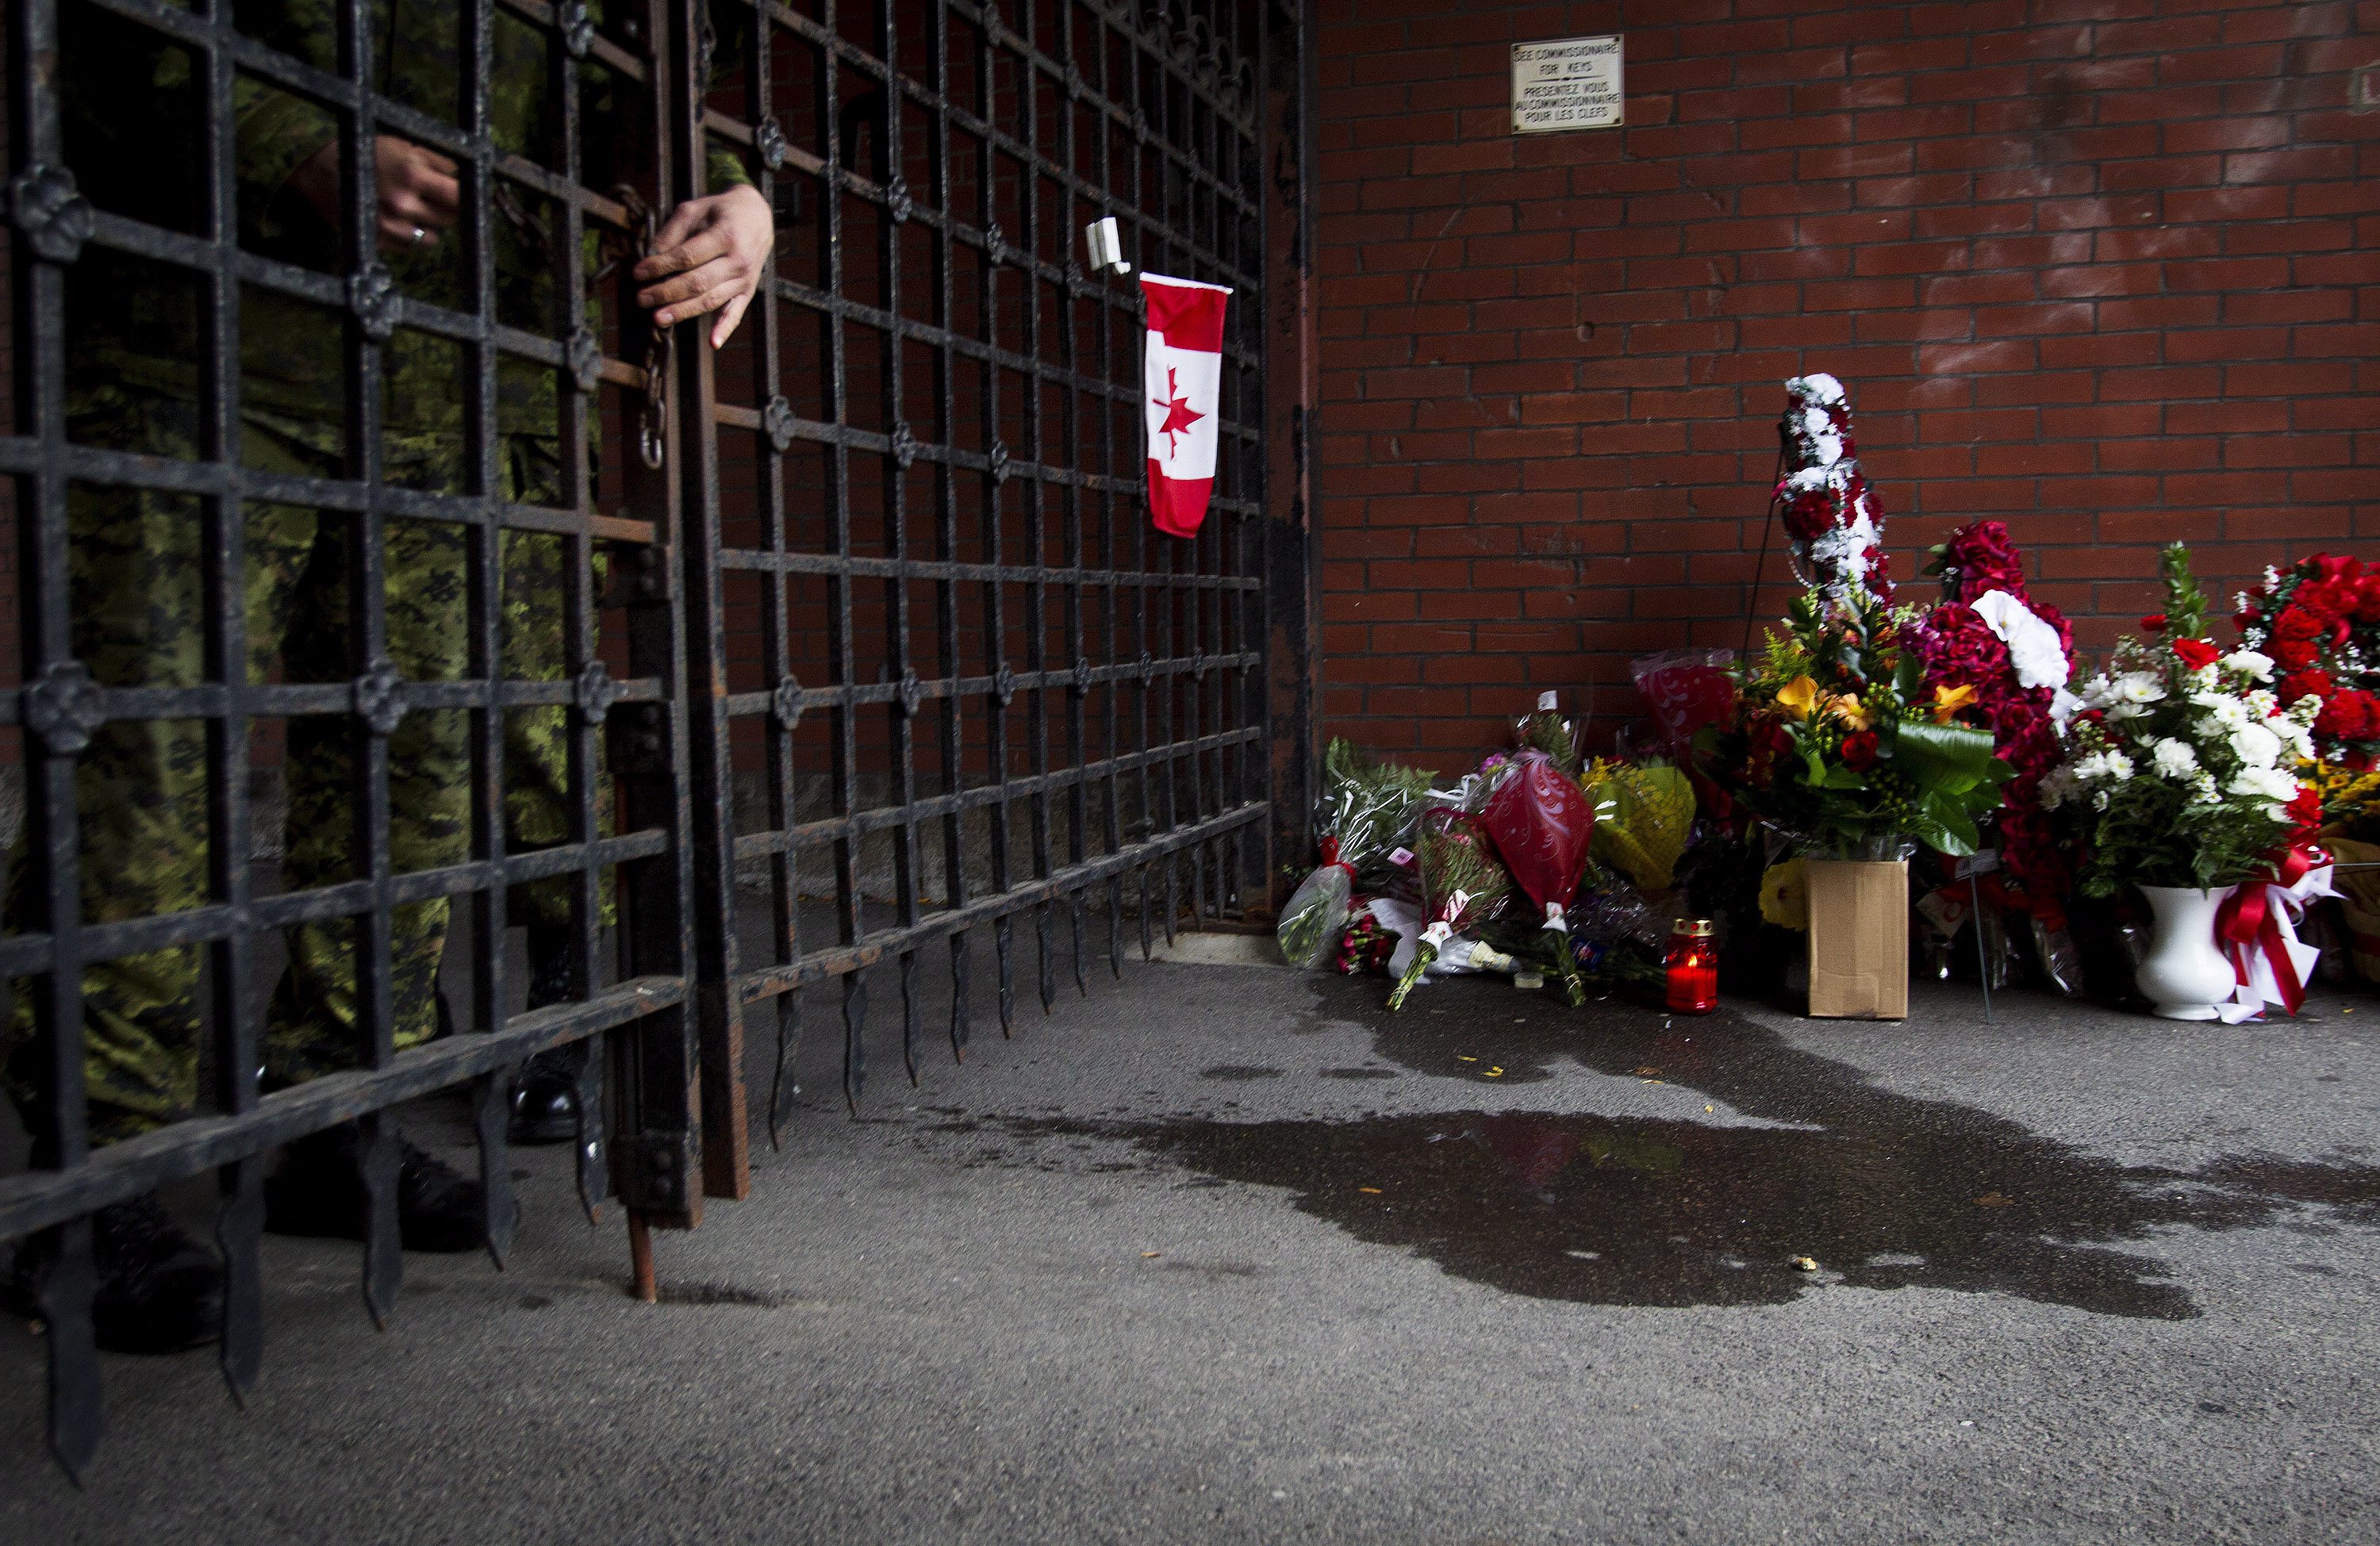 A soldier locks the gates as flowers are placed at a memorial outside the gates of the John Weir Foote Armory, the home of the Argyll and Sutherland Highlanders of Canada in Hamilton, Ontario, on Oct. 22, 2014, in memory of Canadian soldier Nathan Cirillo (Aaron Lynett—AP)